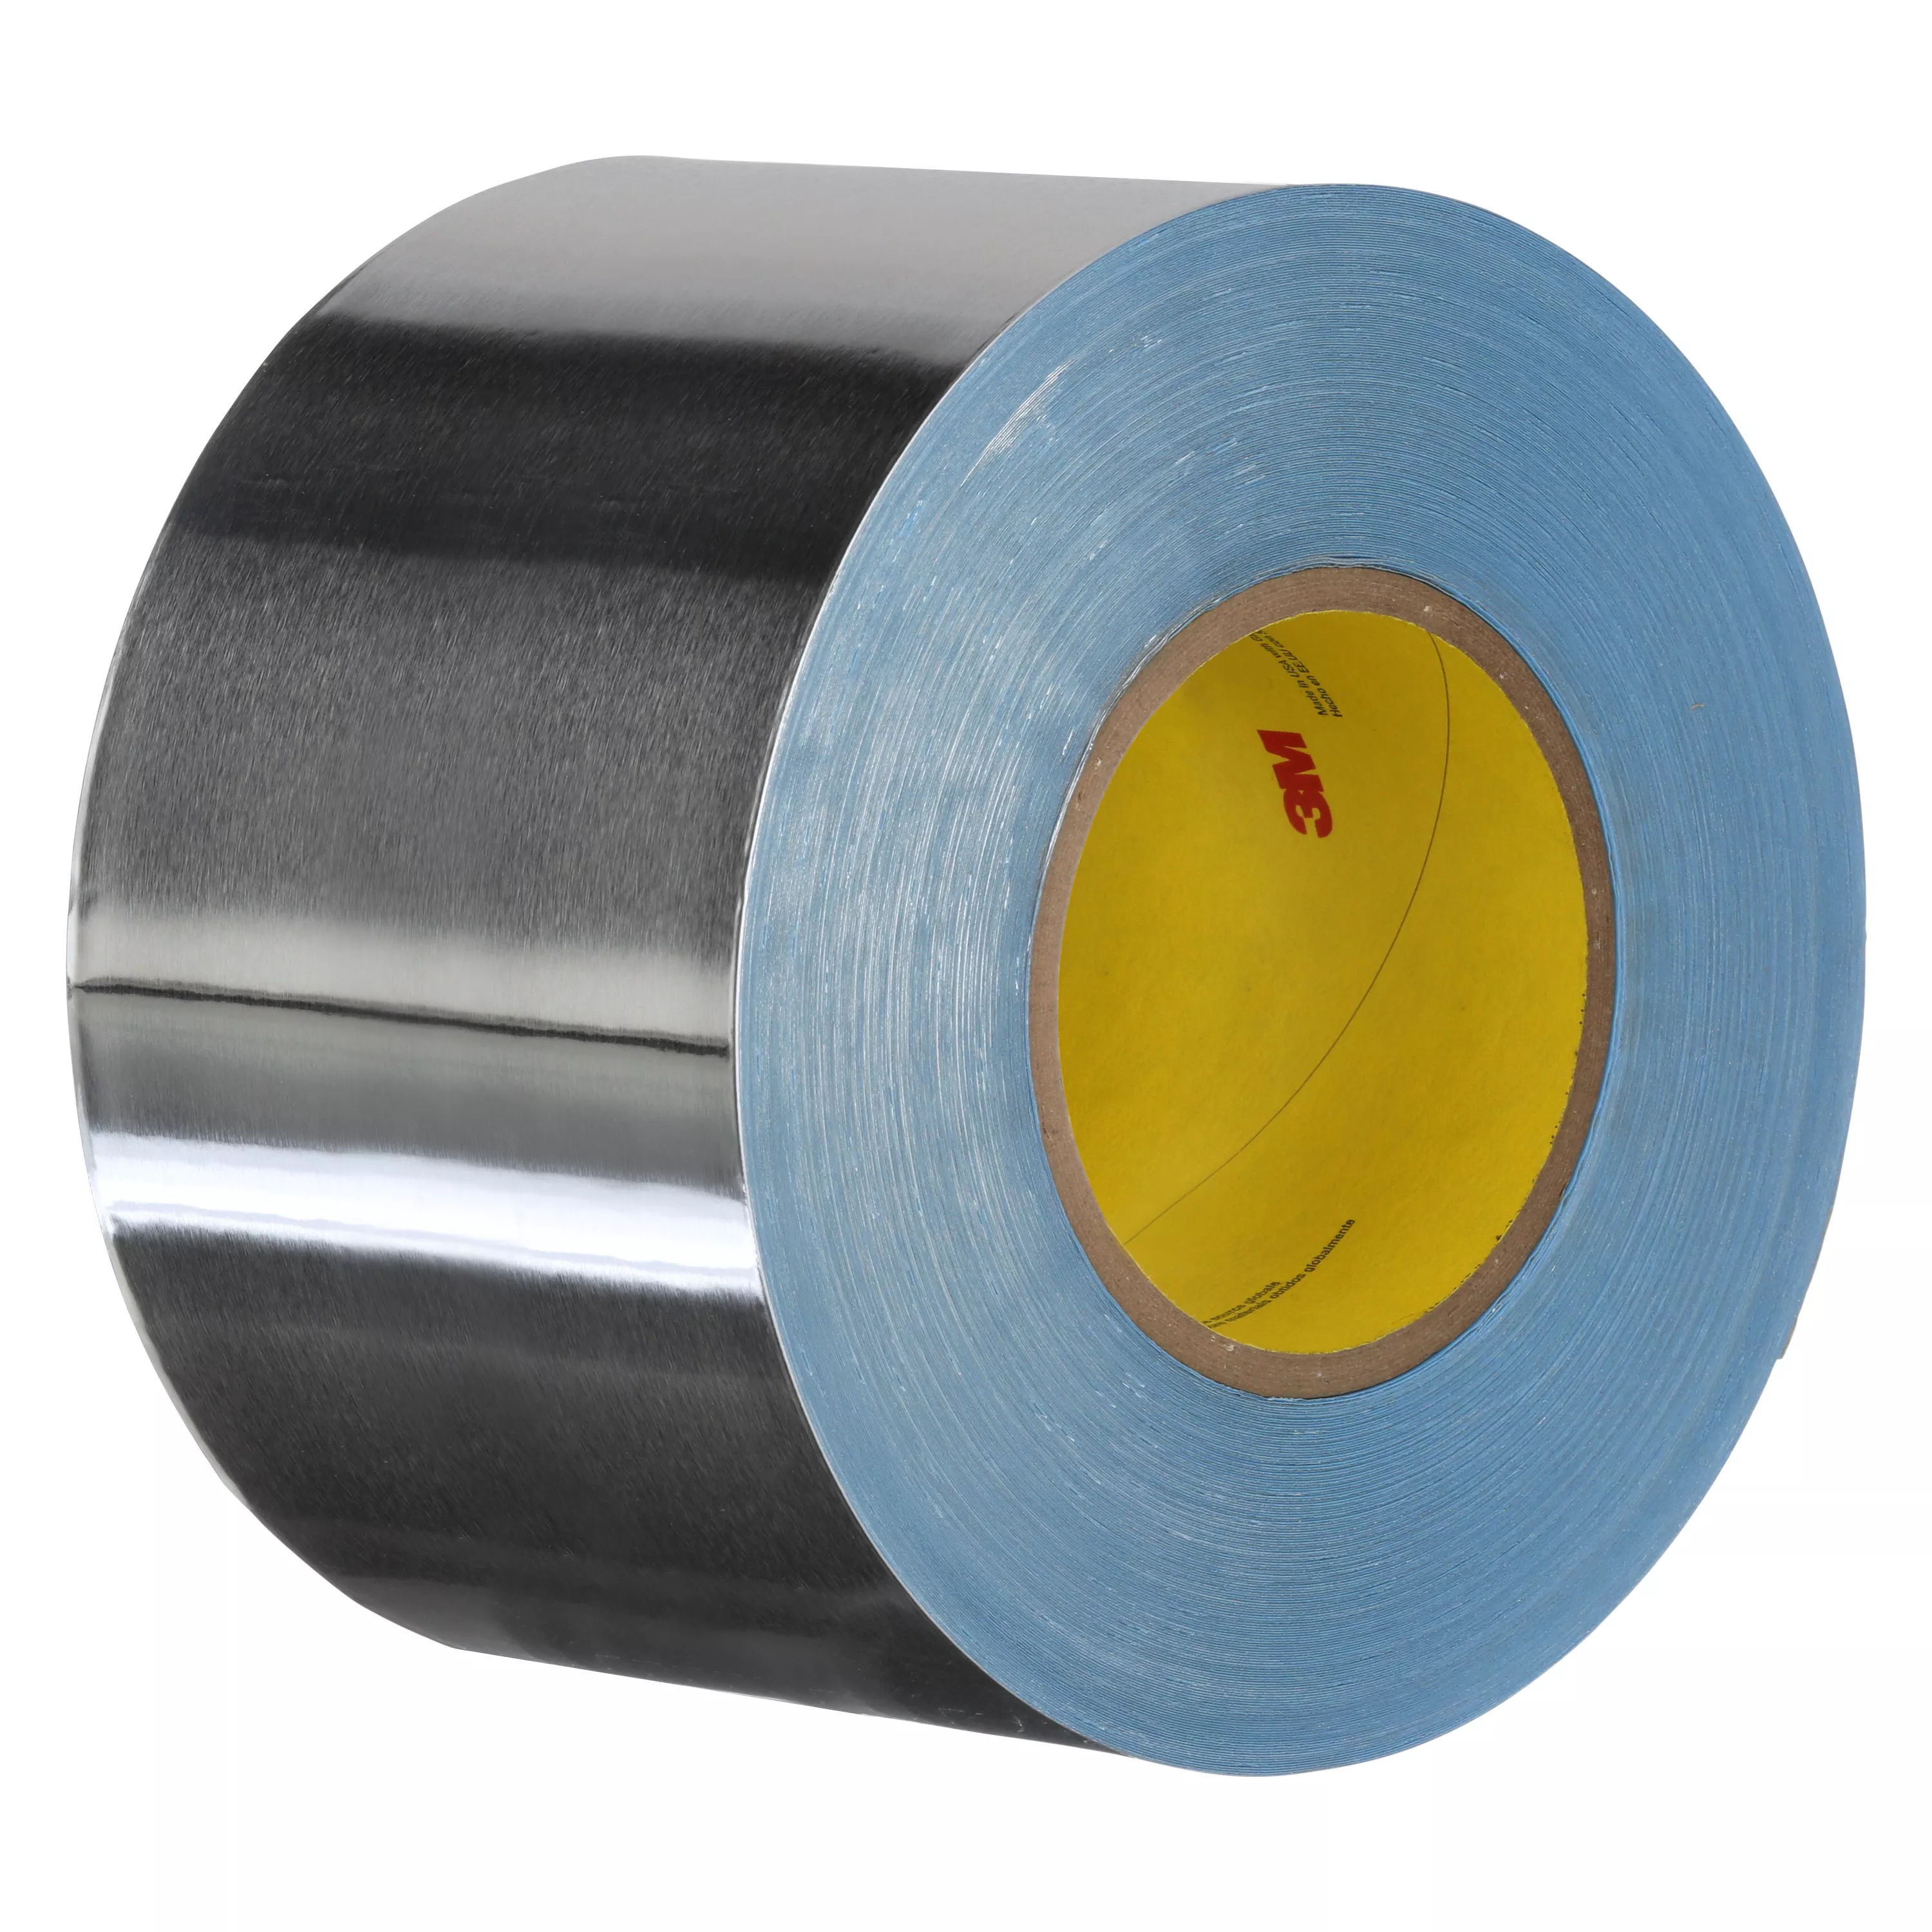 3M™ Vibration Damping Tape 434, Silver, 4 in x 60 yd, 7.5 mil, 3
Roll/Case